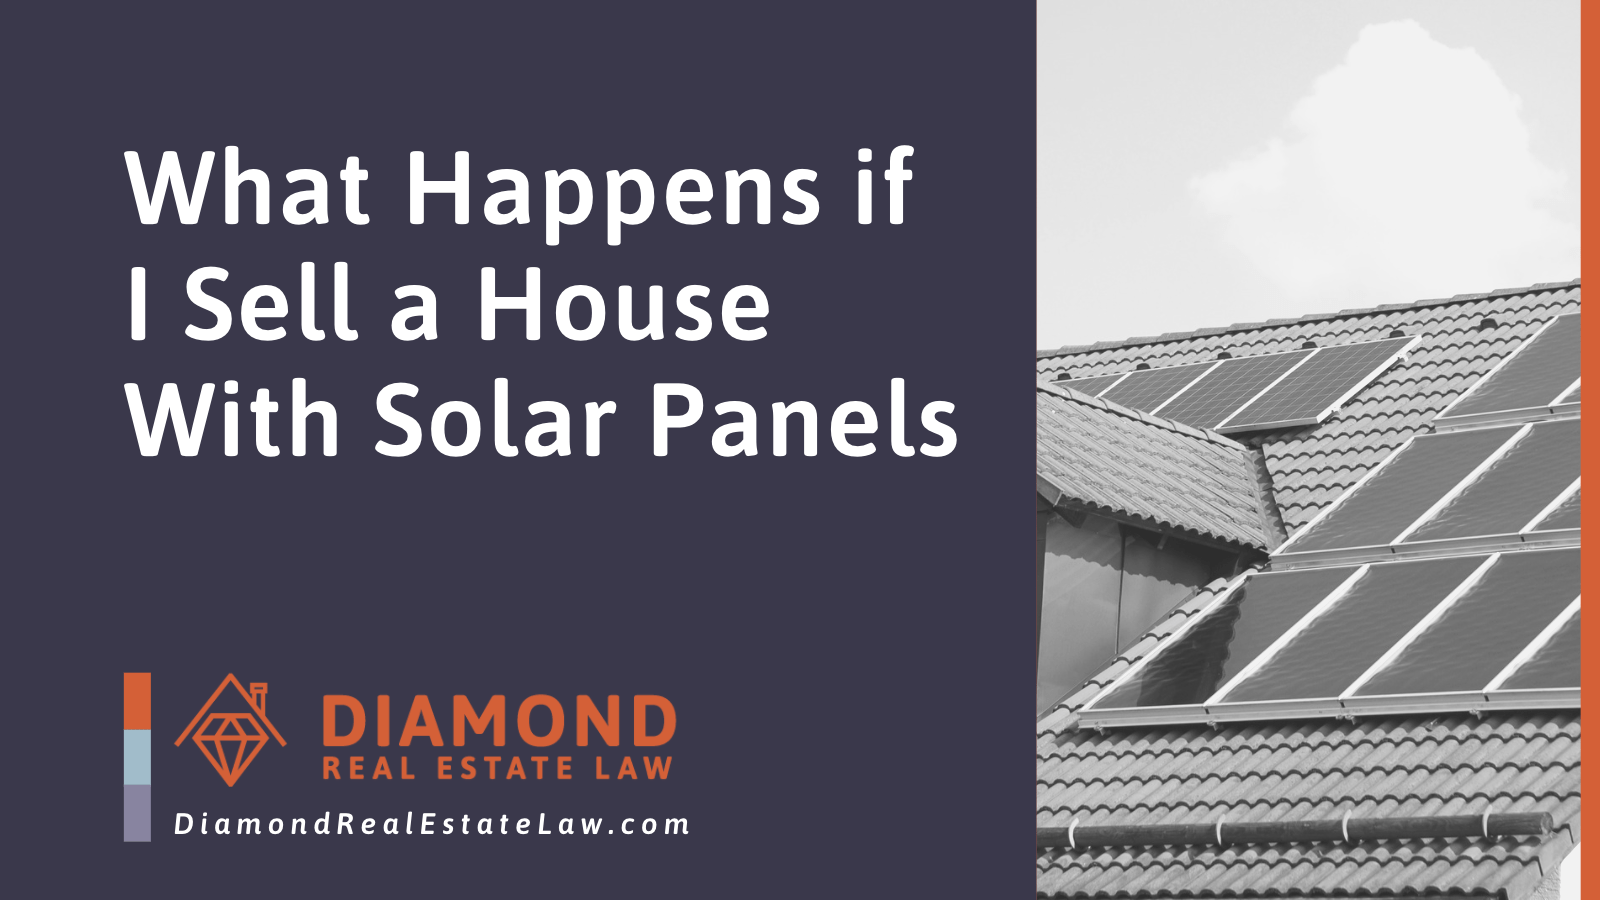 What Happens if I Sell a House With Solar Panels - Diamond Real Estate Law | McHenry, IL Residential Real Estate Lawyer